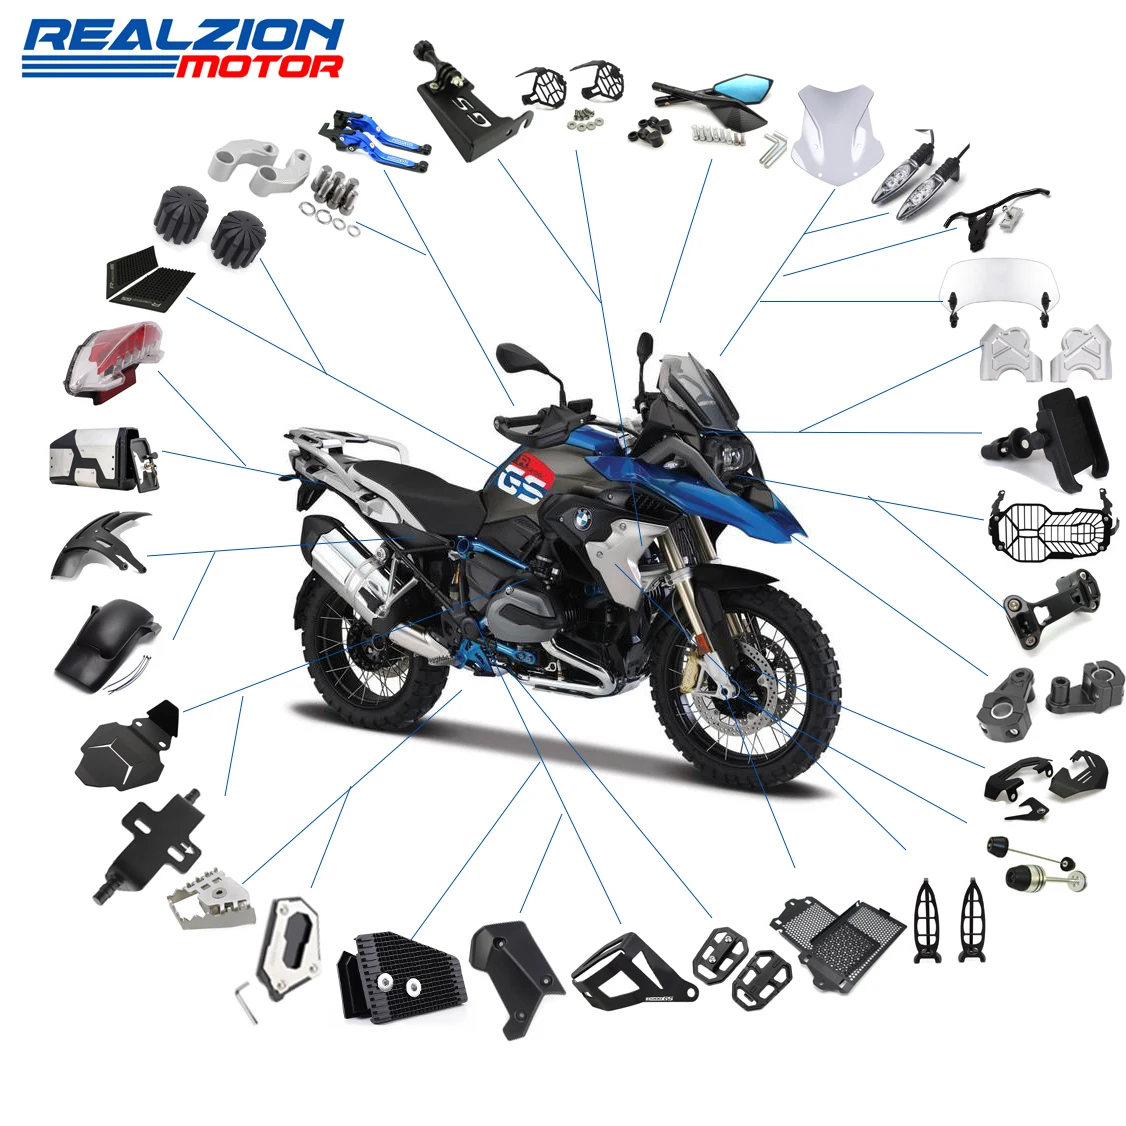 Wholesale Realzion Motorcycle Accessories CNC Processing Parts For S1000R S1000RR GS310 R1200GS R1250 From m.alibaba.com